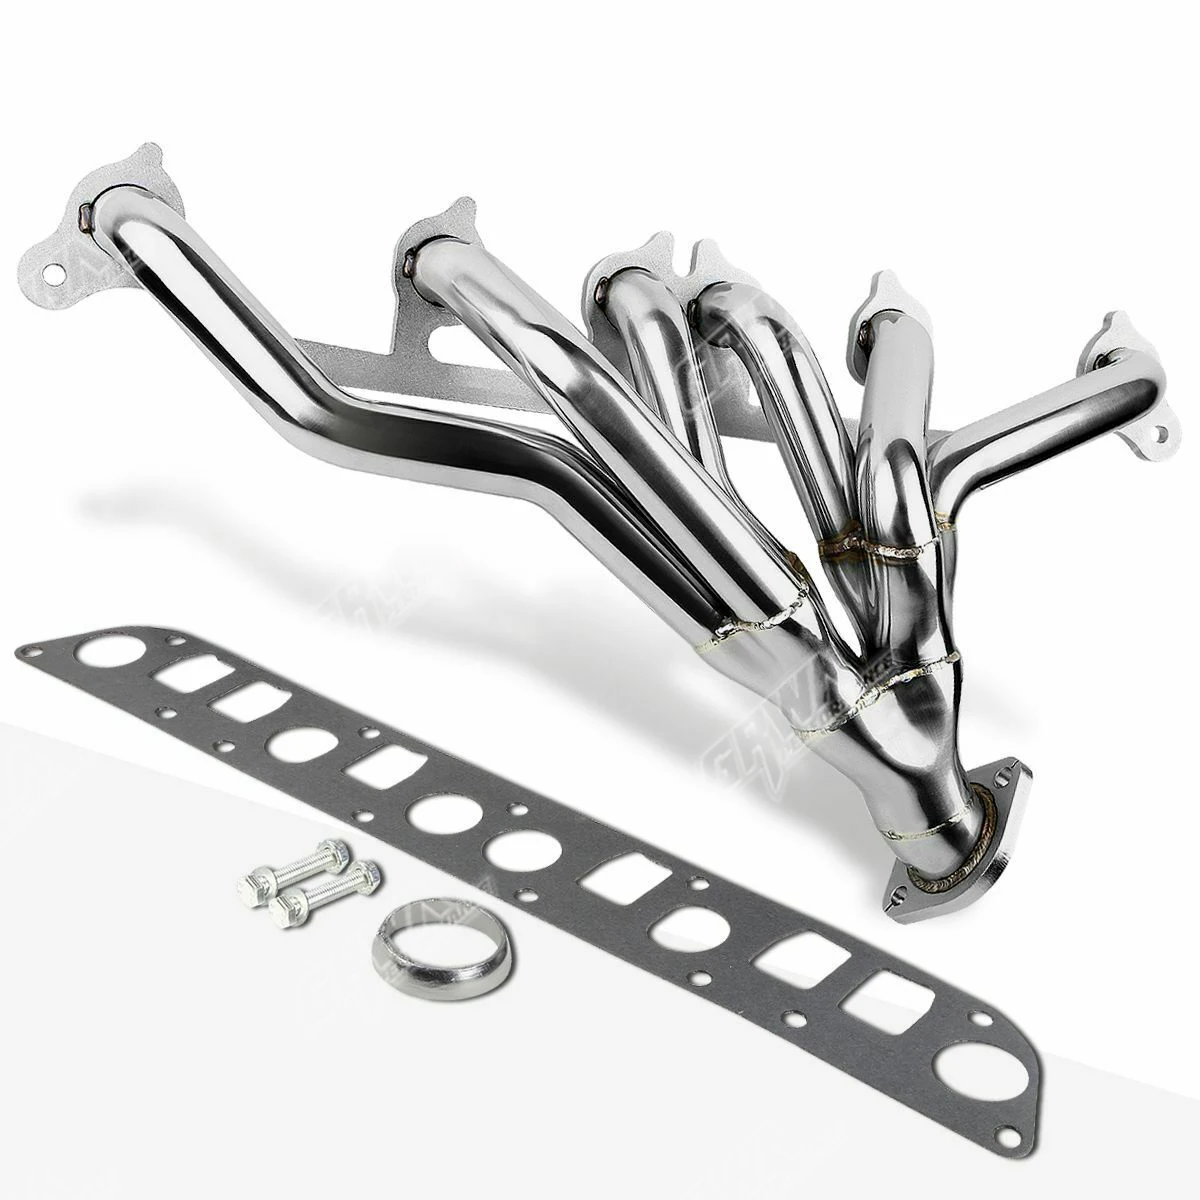 Hot Sale Stainless Steel Exhaust Header Exhaust Manifold For Jeep Wrangler  Cherokee 91-99  - Buy Exhaust Header,Stainless Steel Exhaust,Exhaust  Manifold Product on 